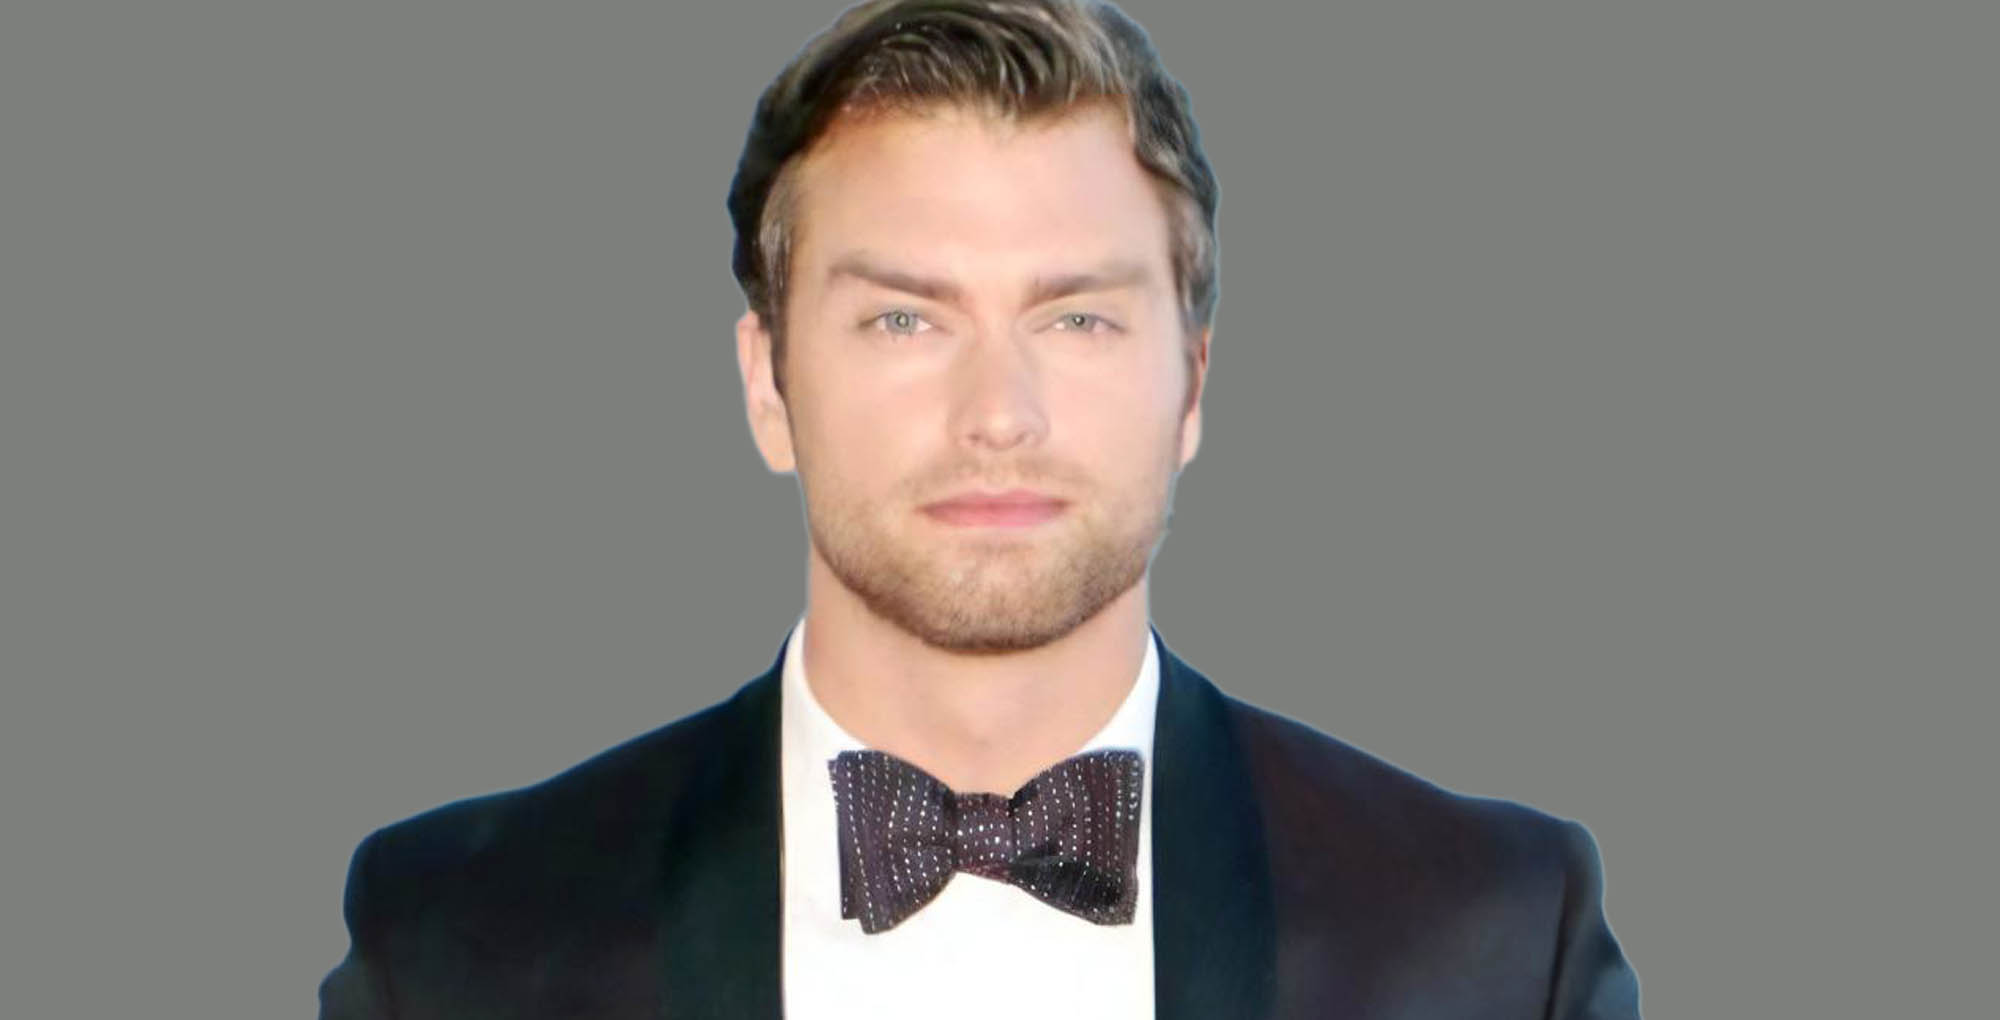 bold and the beautiful alum pierson fode celebrates his birthday.